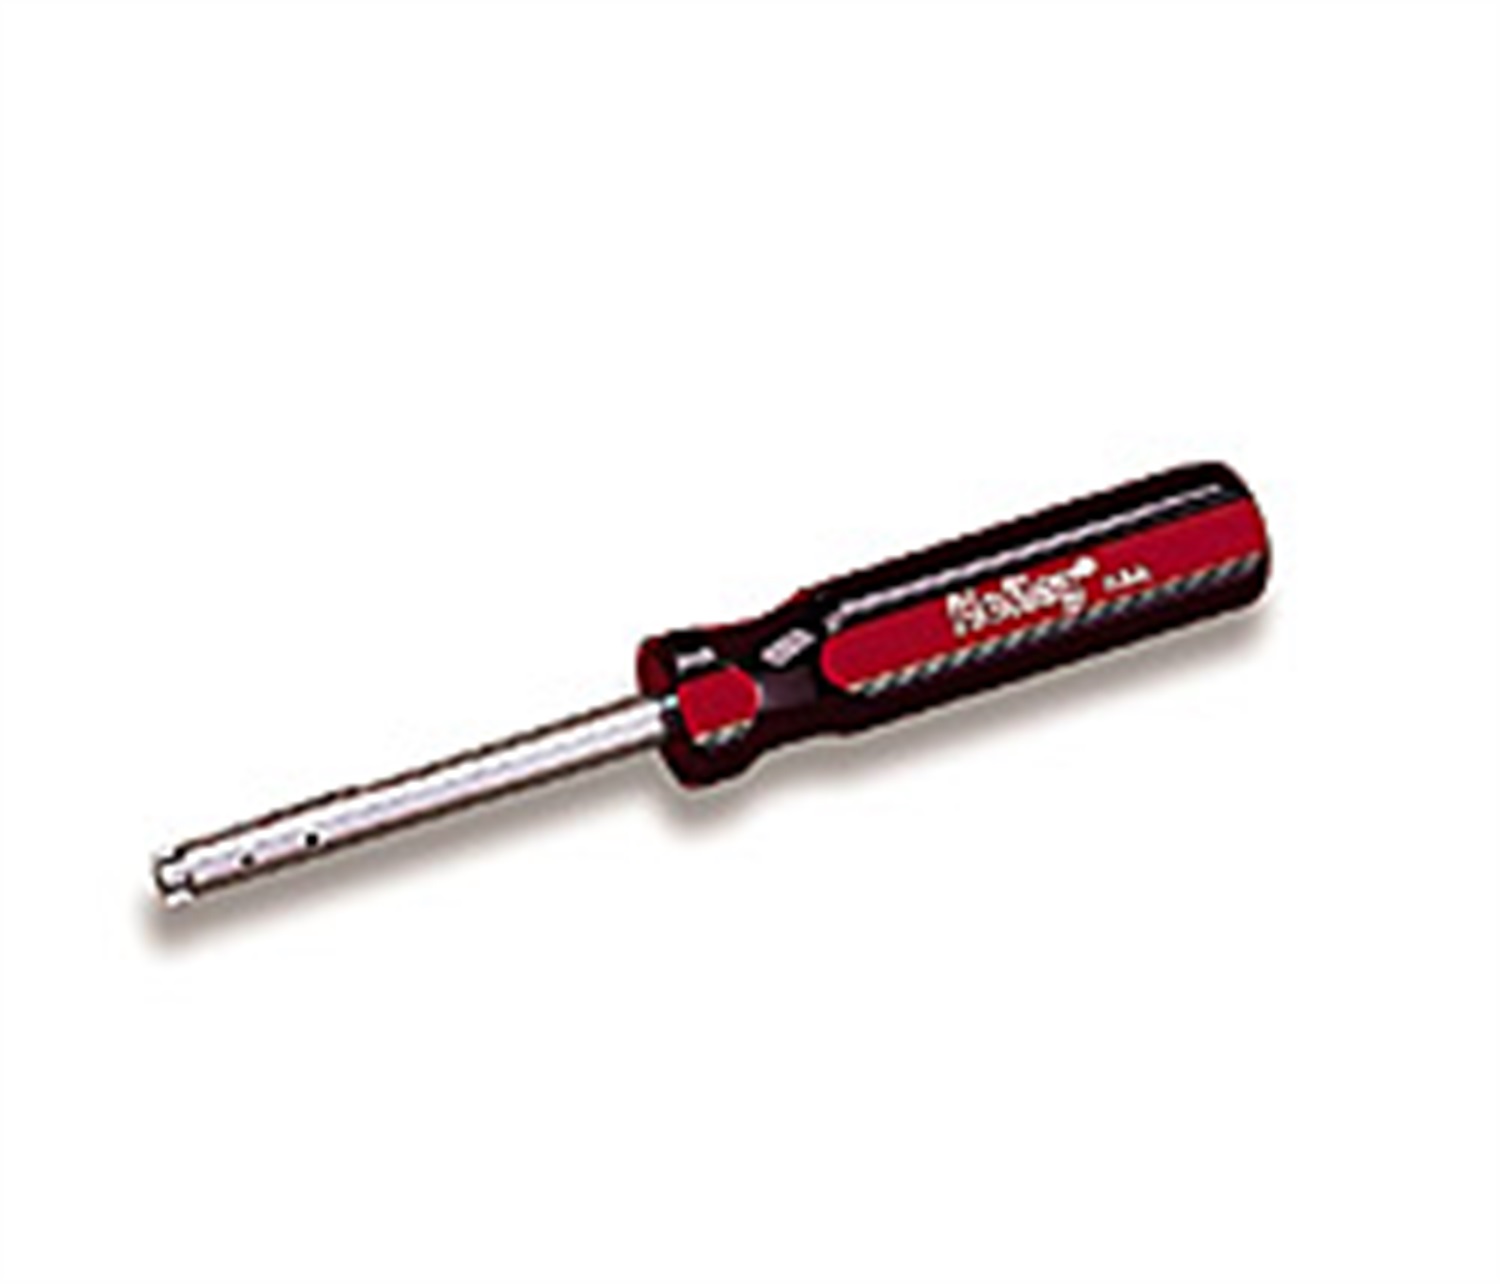 Holley Performance Holley Performance 26-68 Carburetor Jet Removal Tool